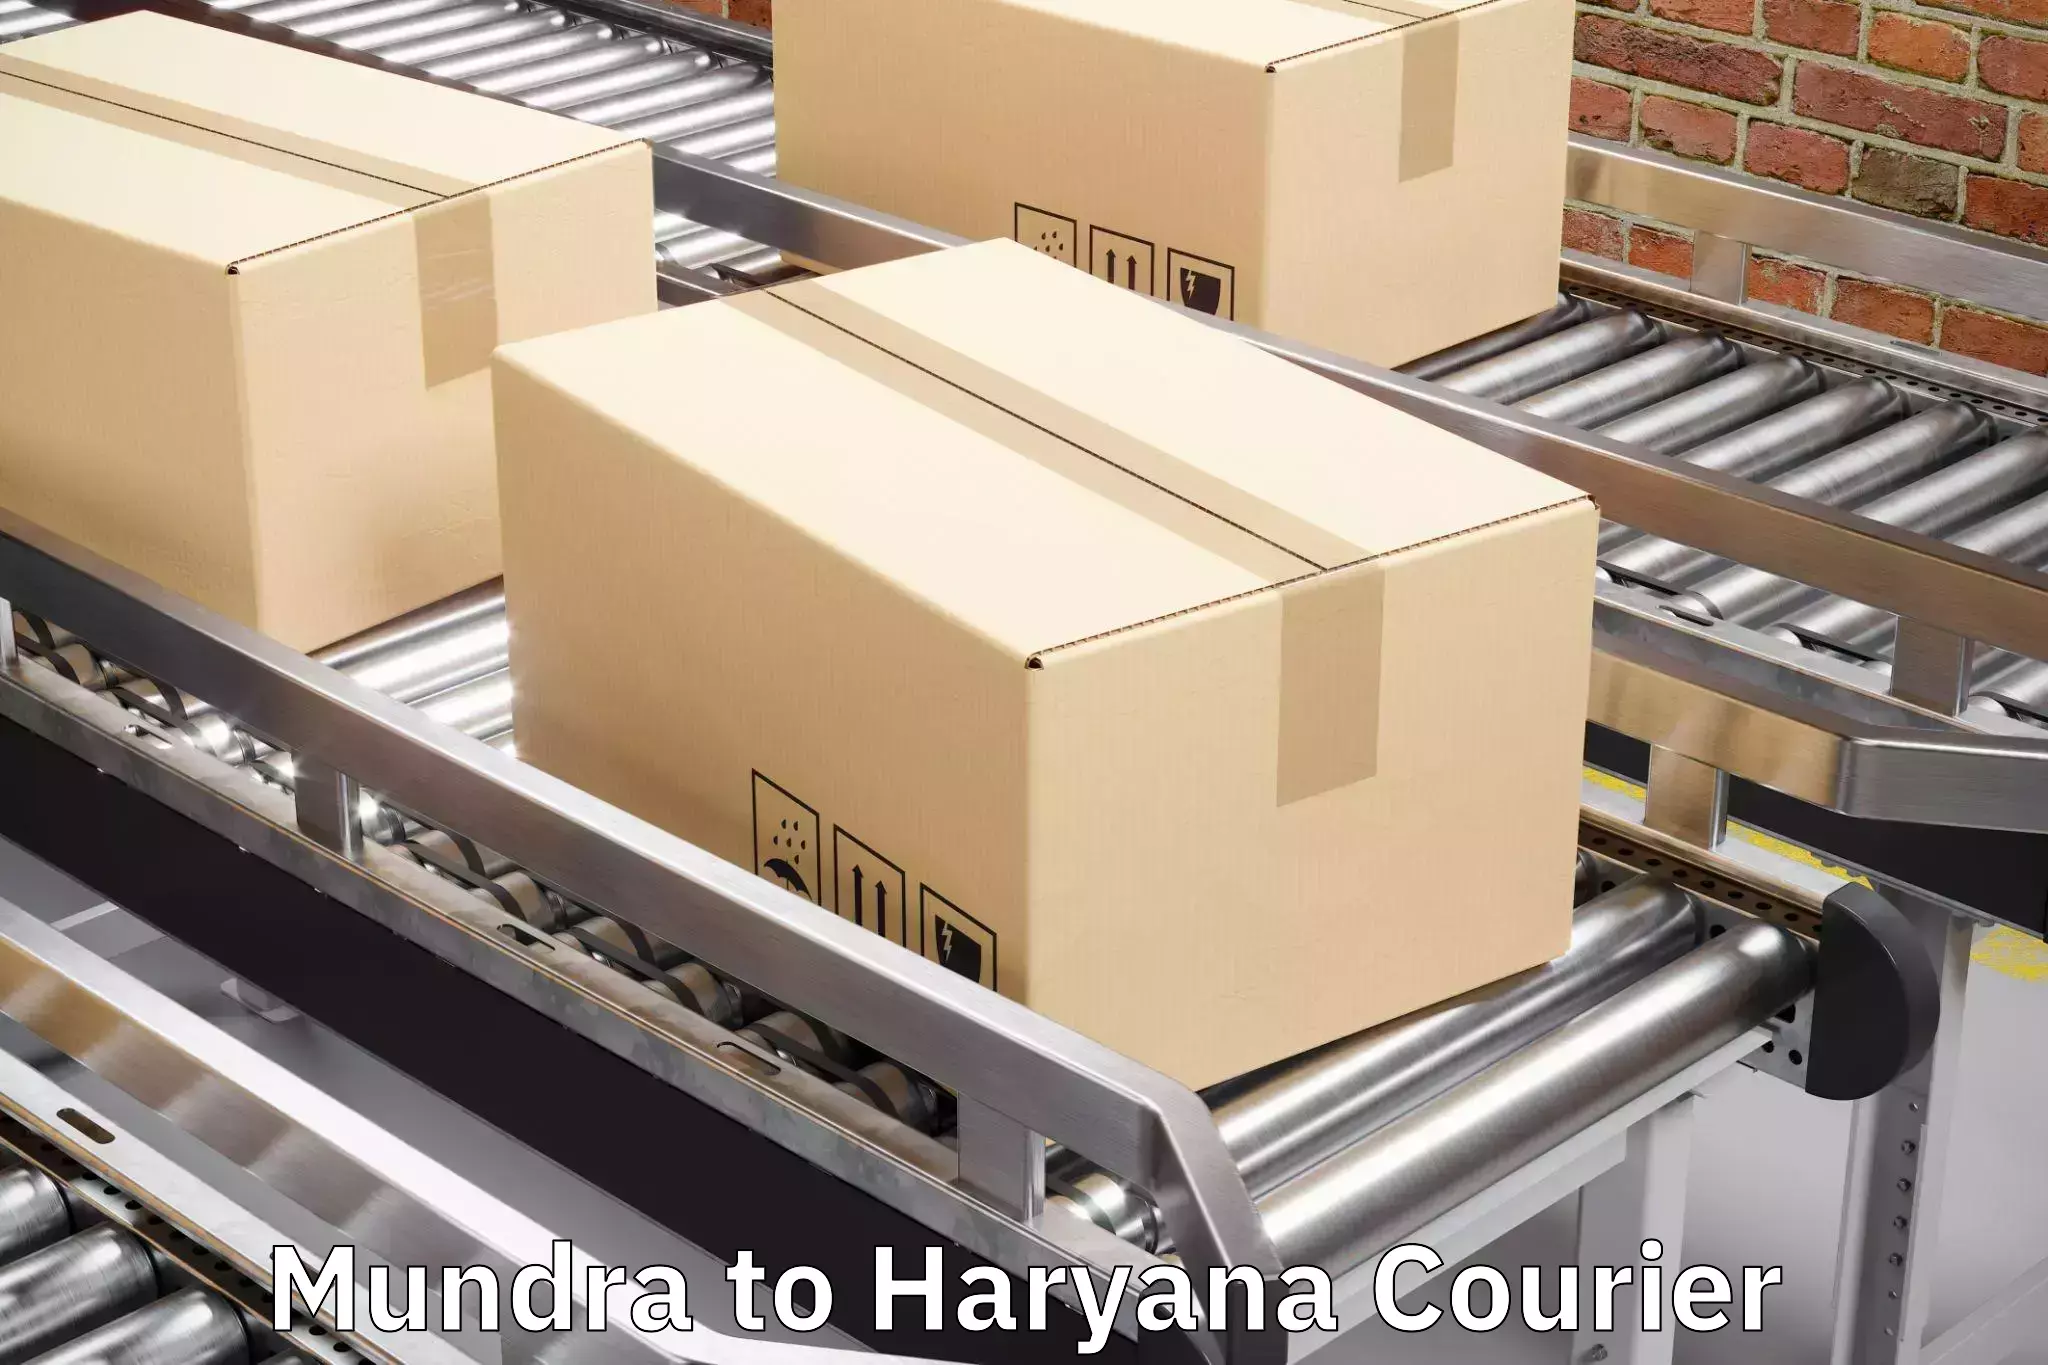 Luggage delivery system Mundra to Gurugram